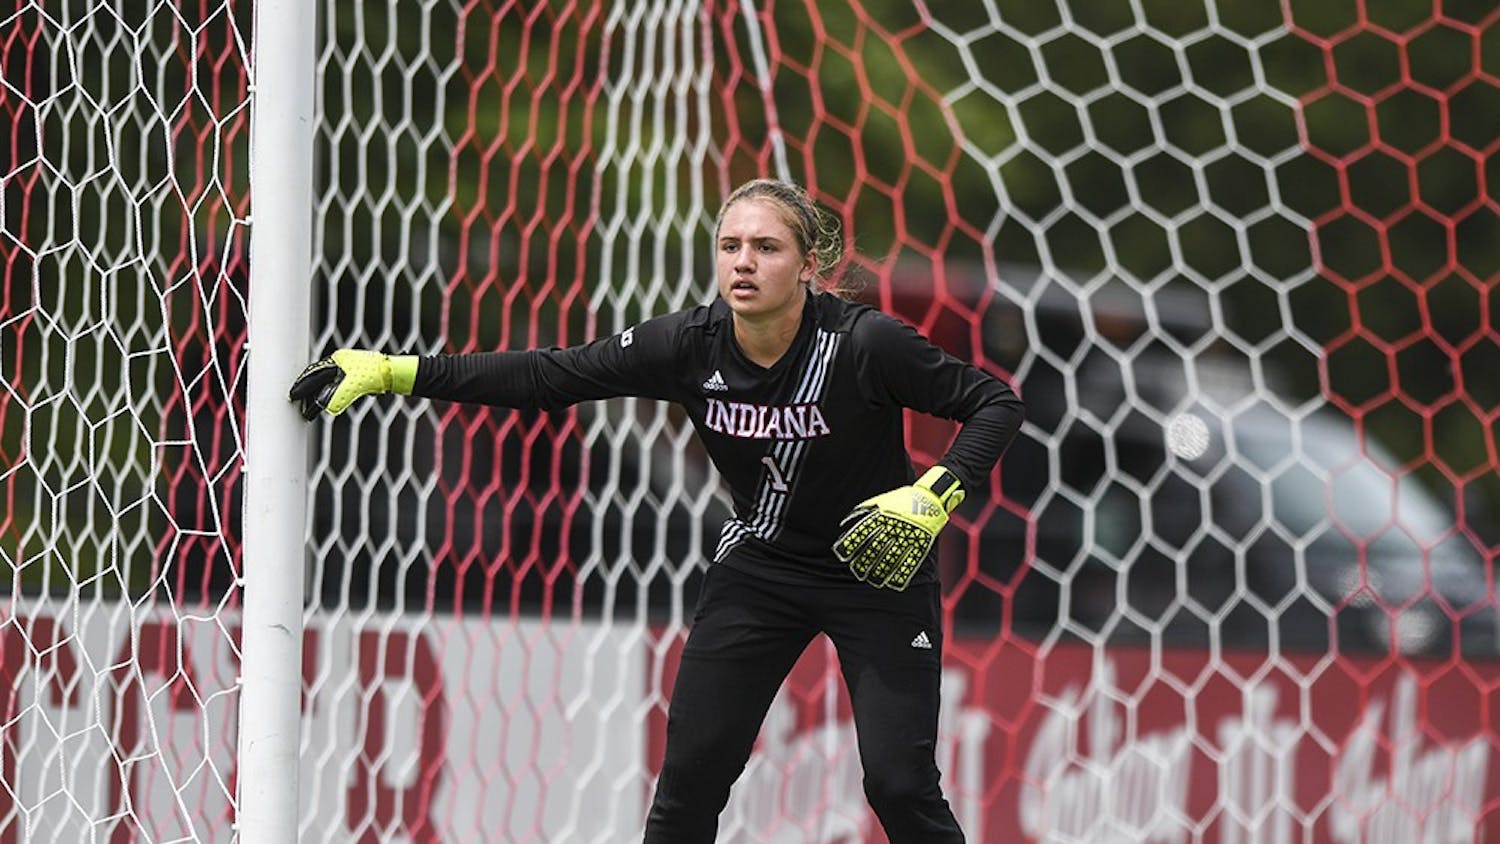 Bethany Kopel (1) defends the IU goal against then-No. 13 Clemson on Aug. 20 at Bill Armstrong Stadium in Bloomington. Kopel has started all of IU's games as a freshman this season.